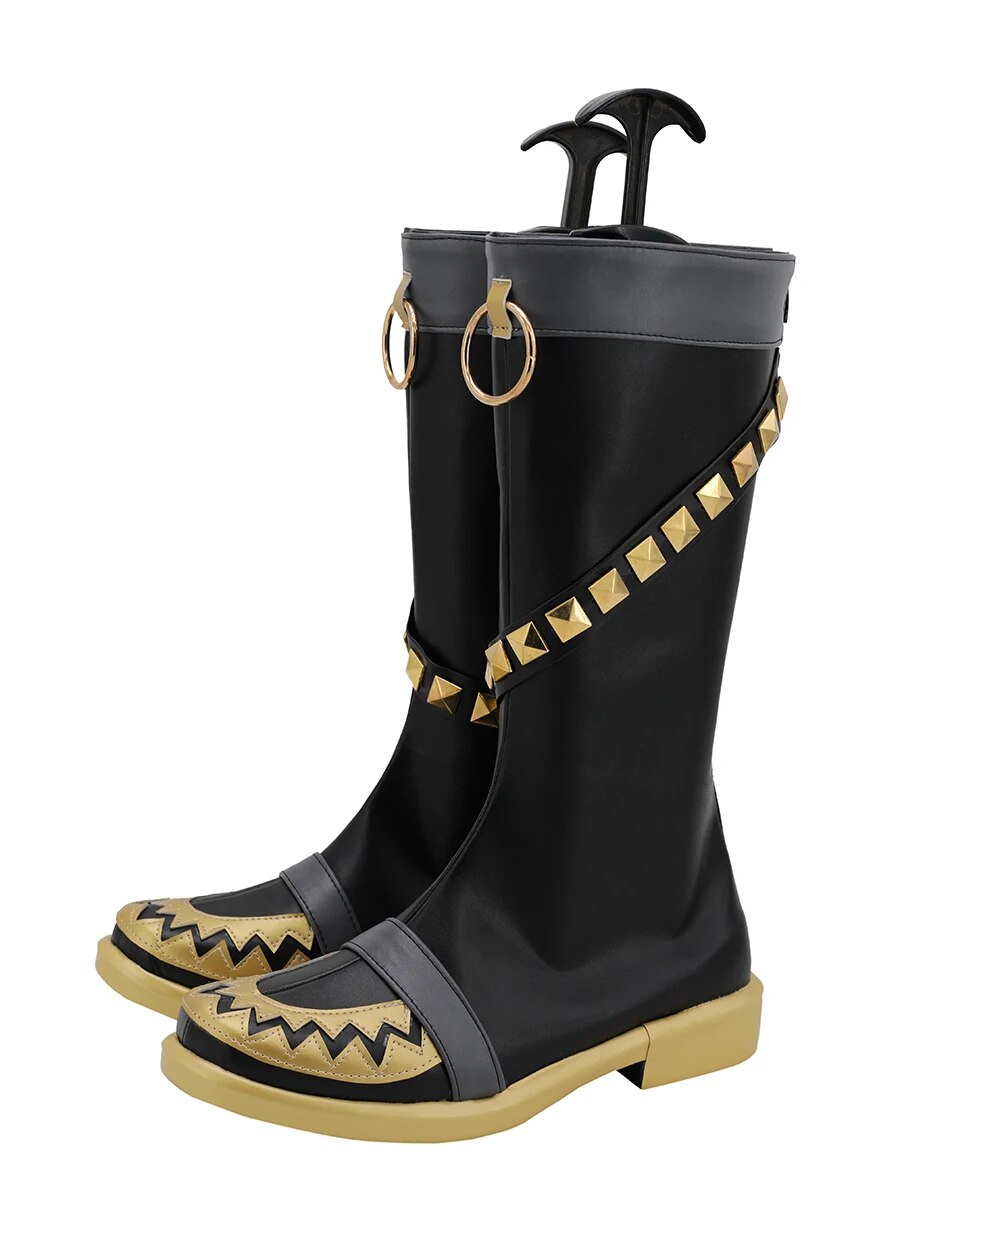 One Piece Halloween Portgas D. Ace Cosplay Boots Black Leather Shoes Custom Made Any Size for Unisex